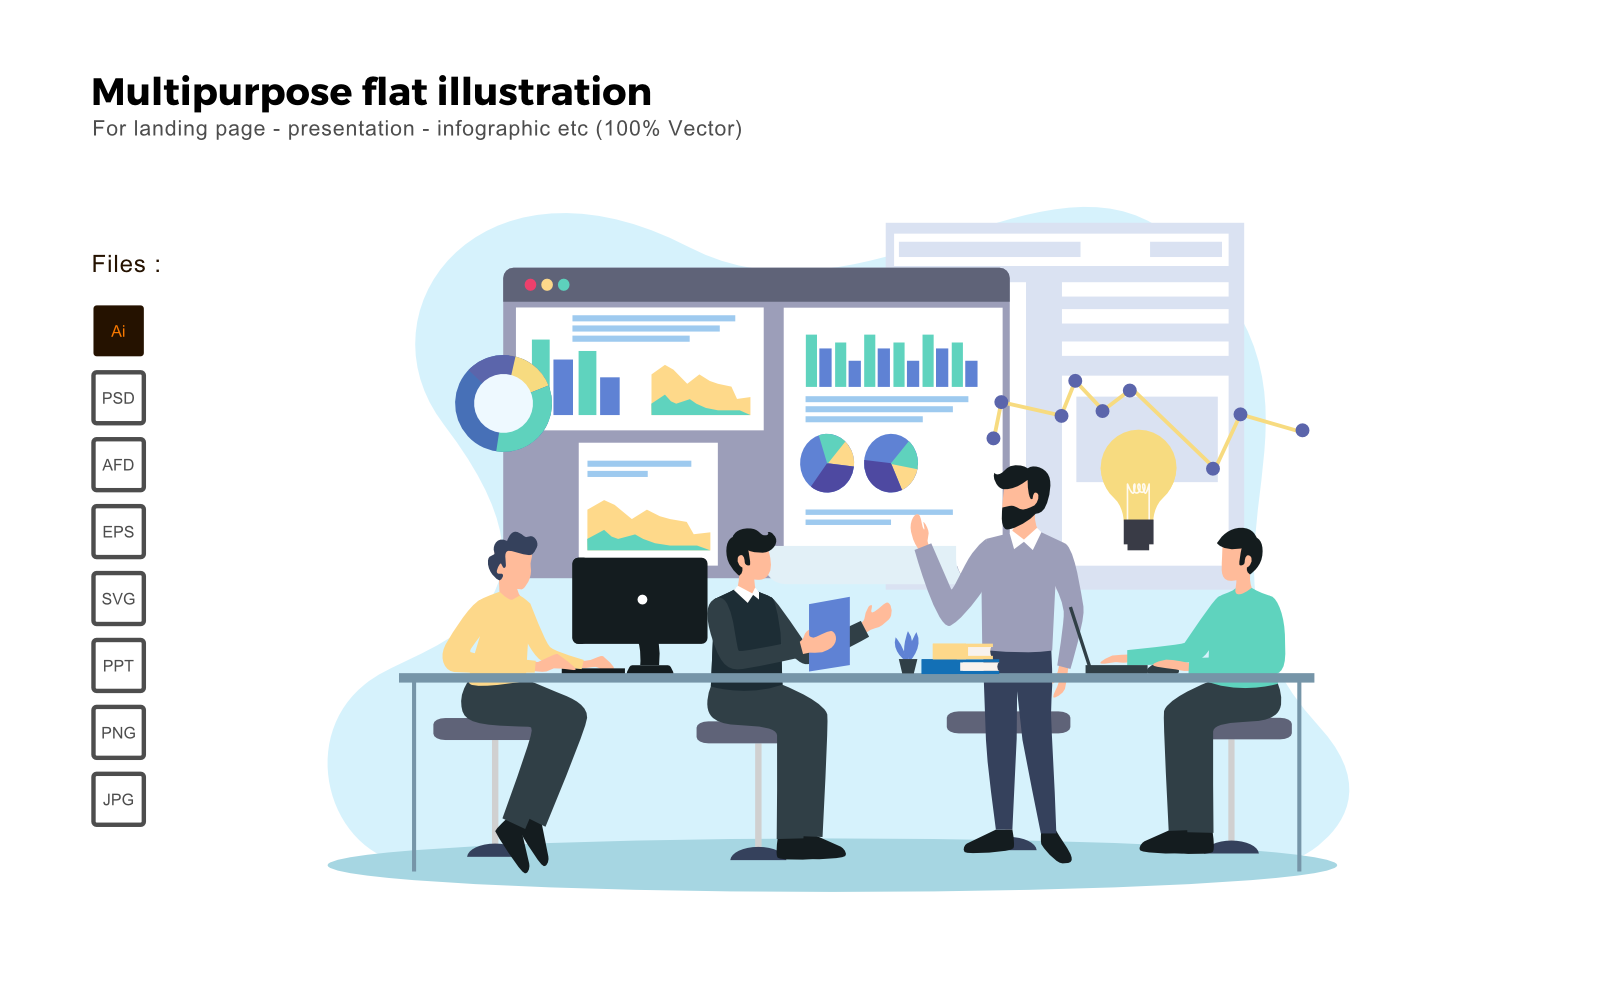 Multipurpose Flat Illustration Meeting With Teams - Vector Image